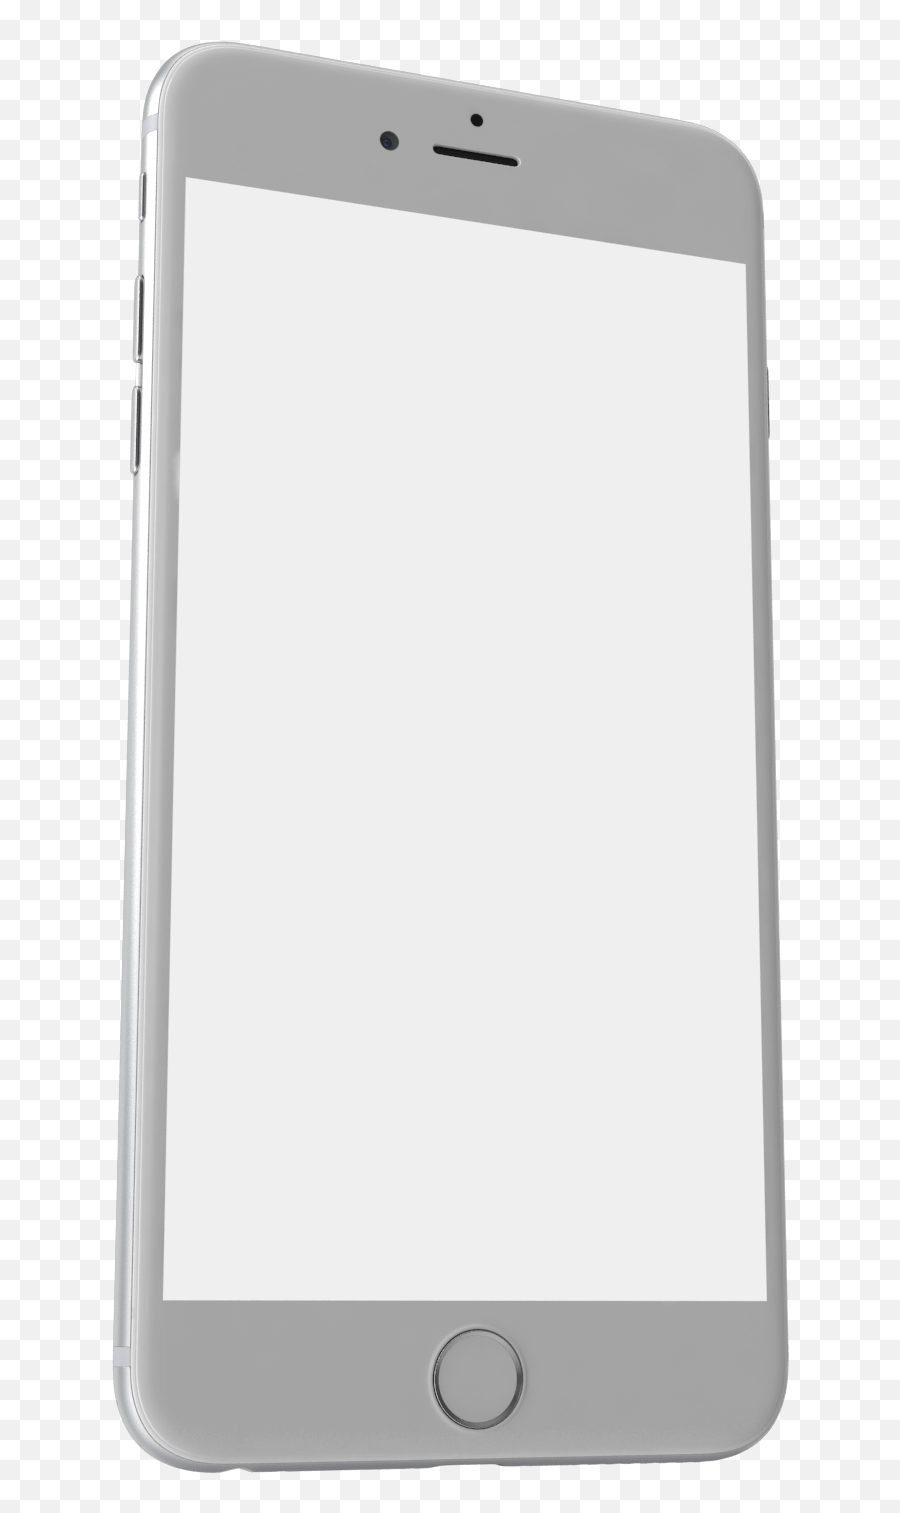 Download Iphone 6 Plus Silver Png Image For Free Emoji,Iphone 6 Png